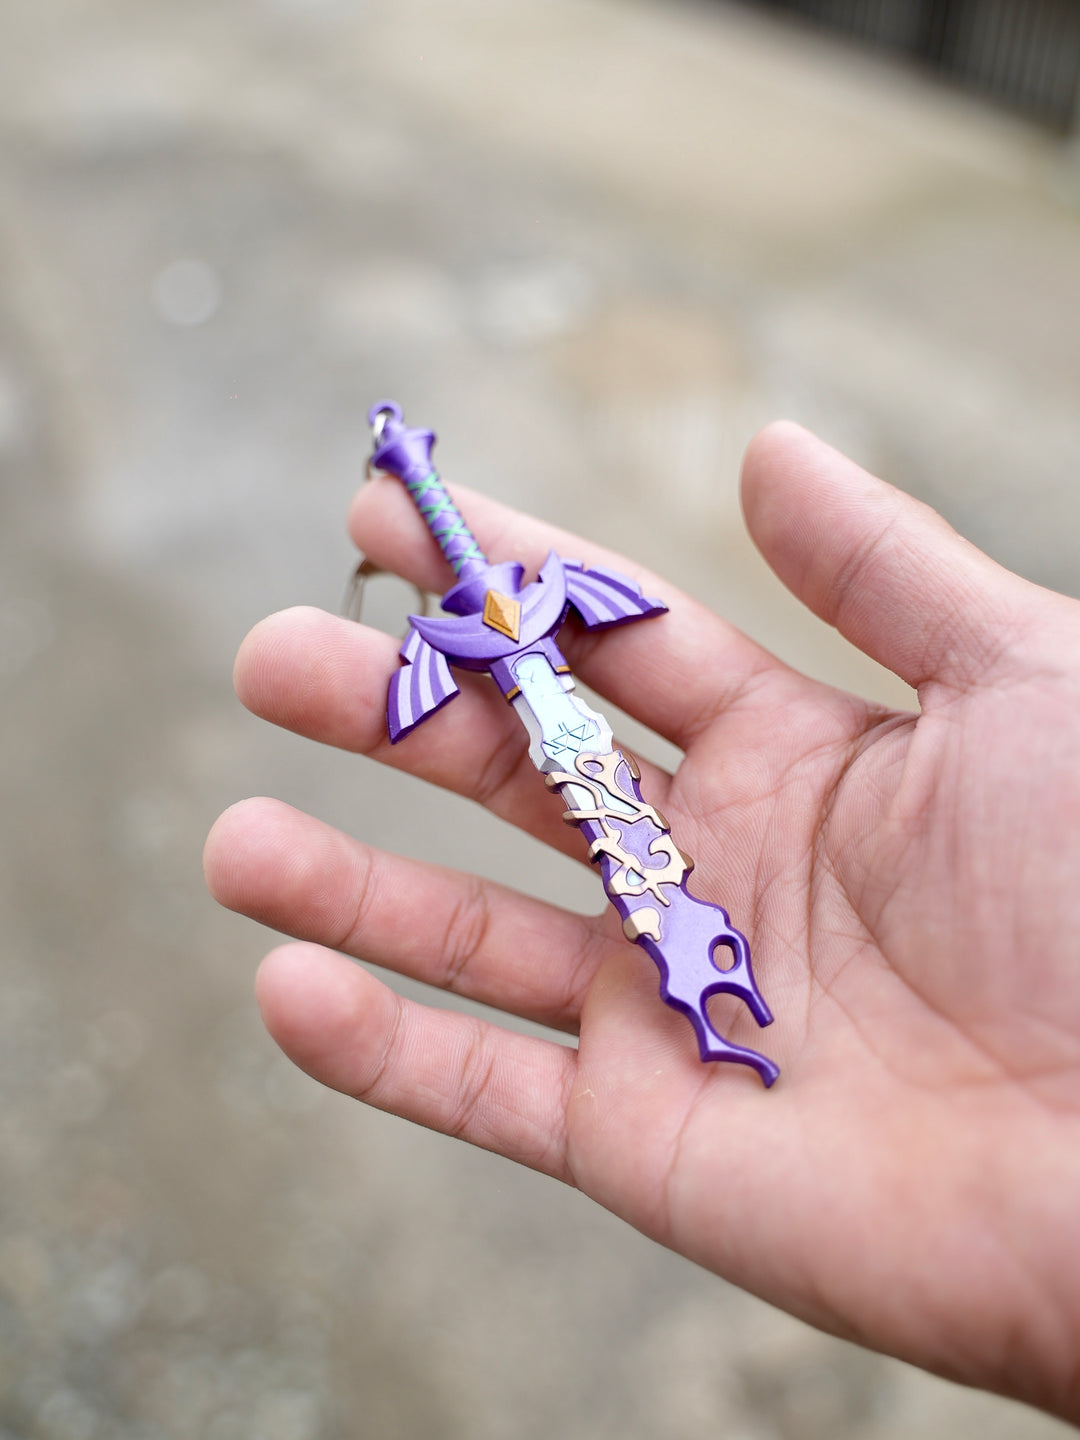 Decayed Master Sword